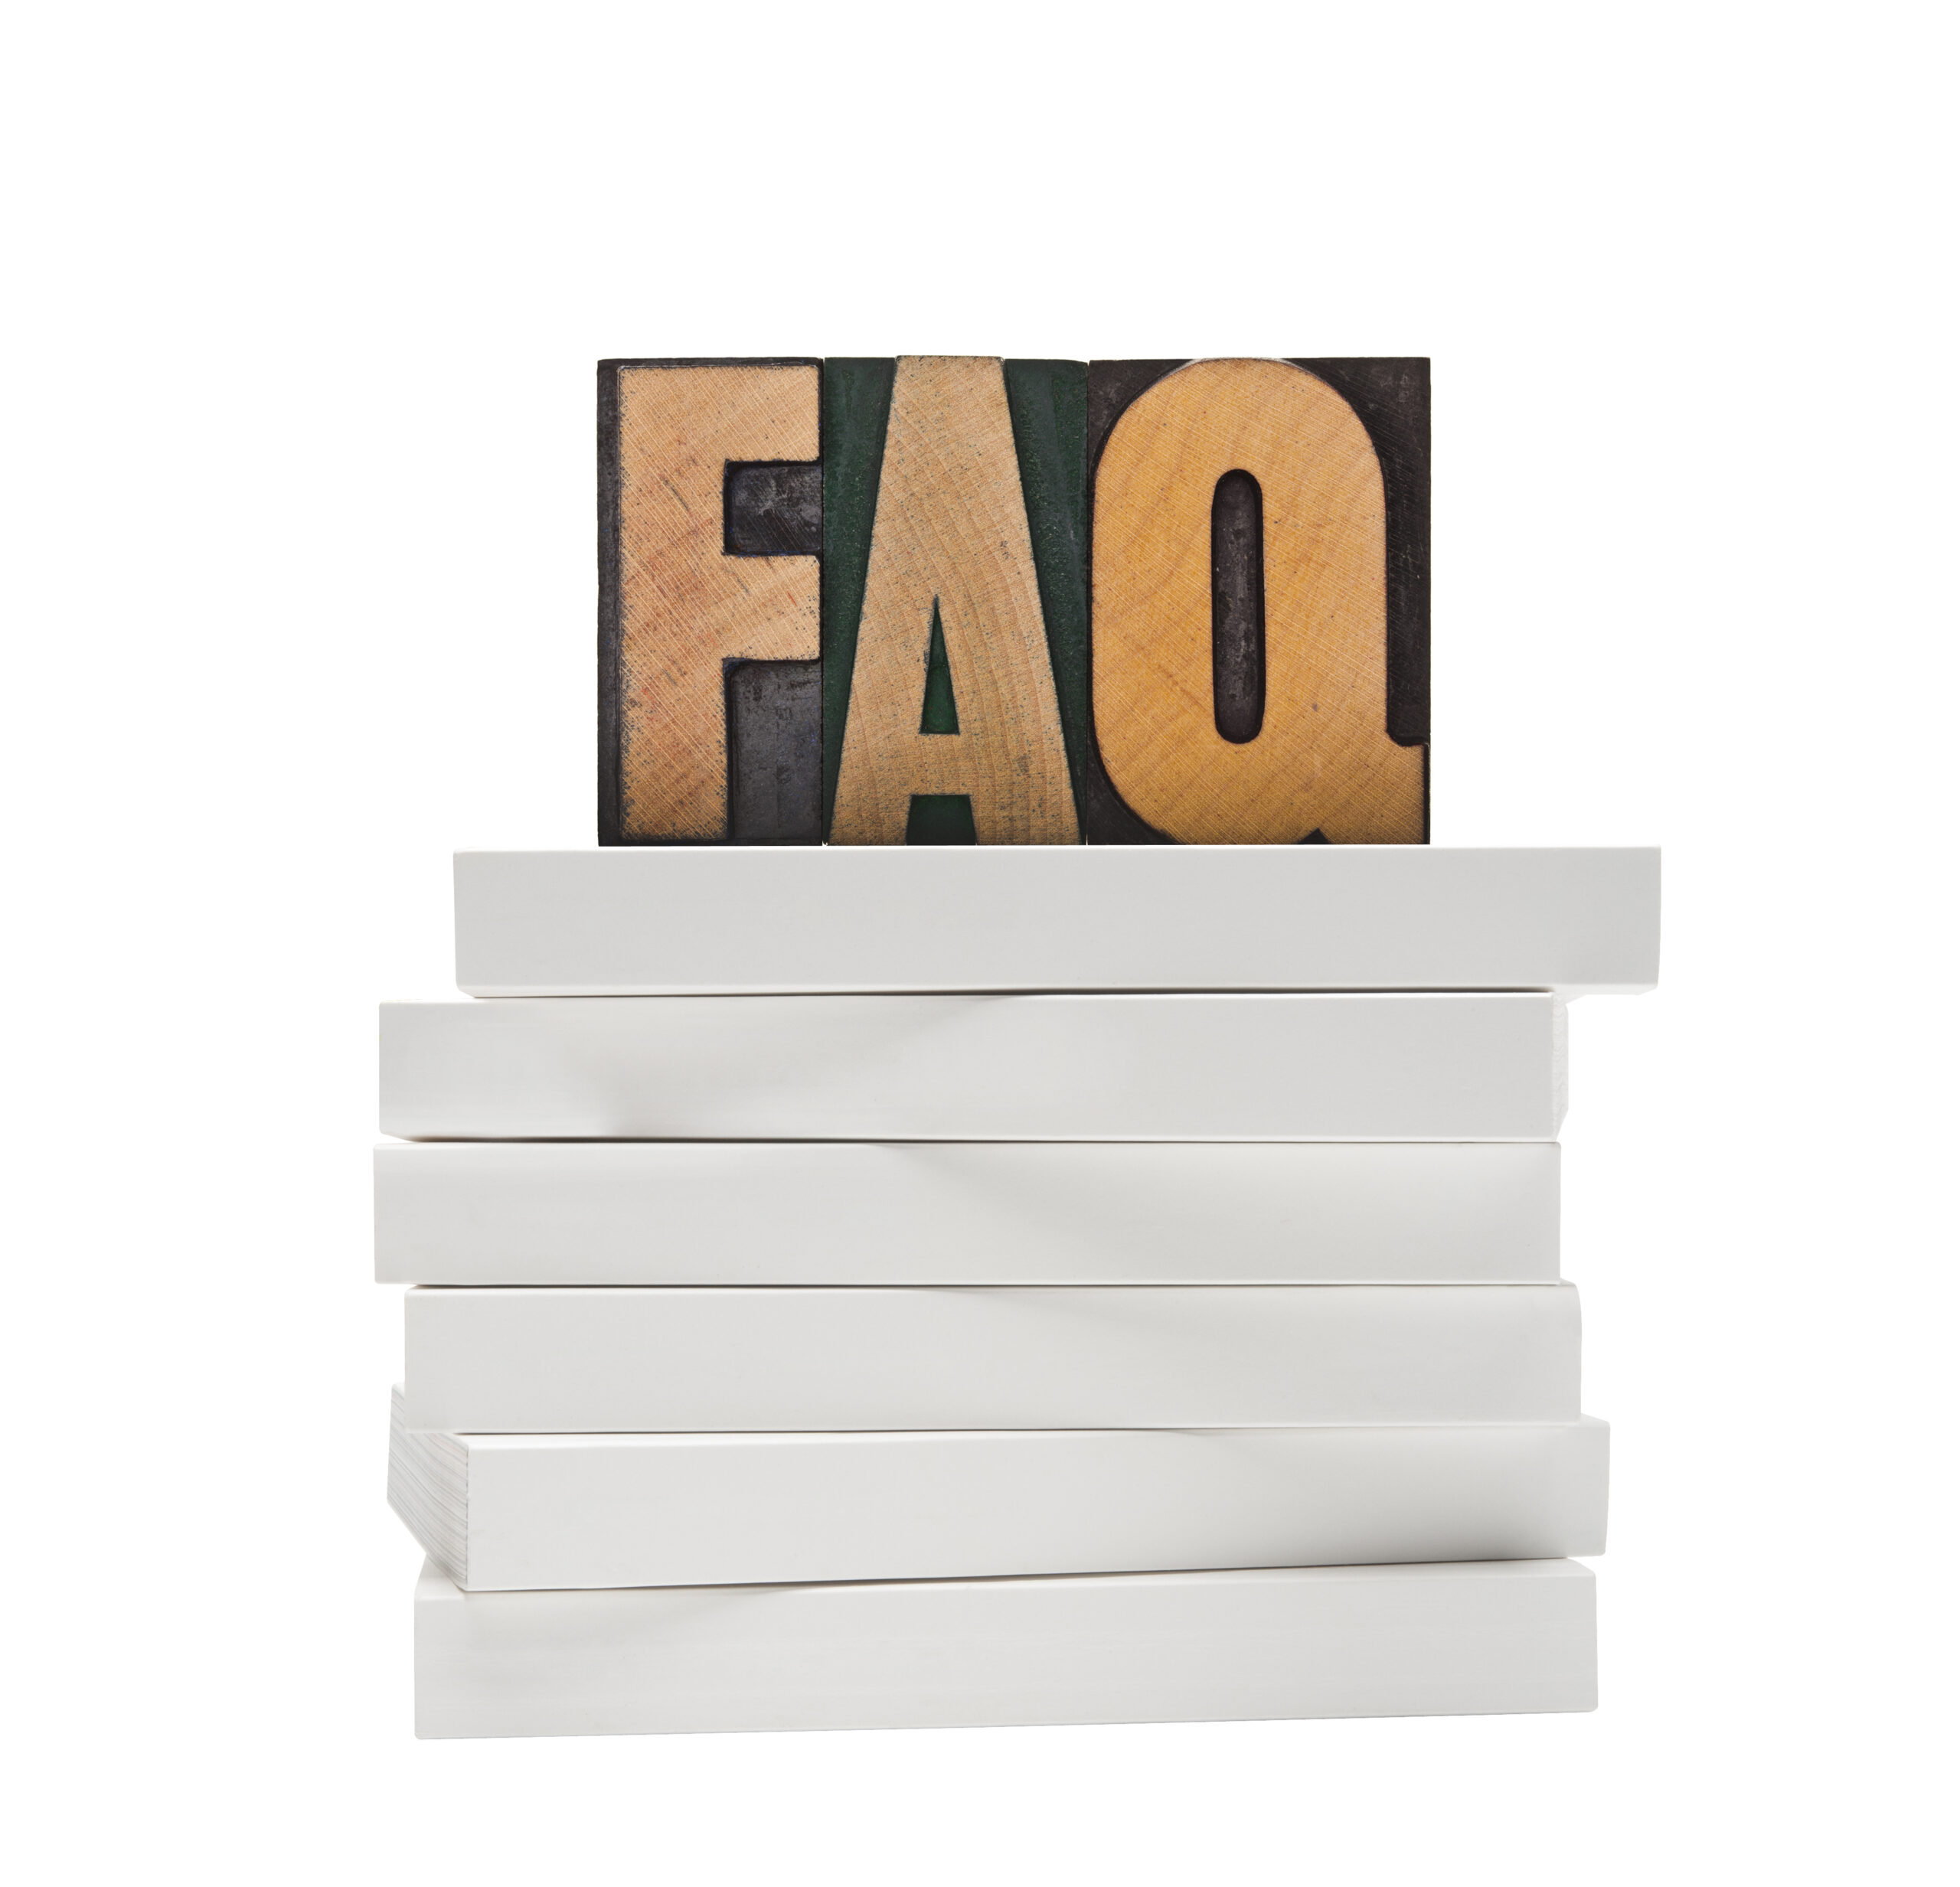 FAQ(frequently asked questions)